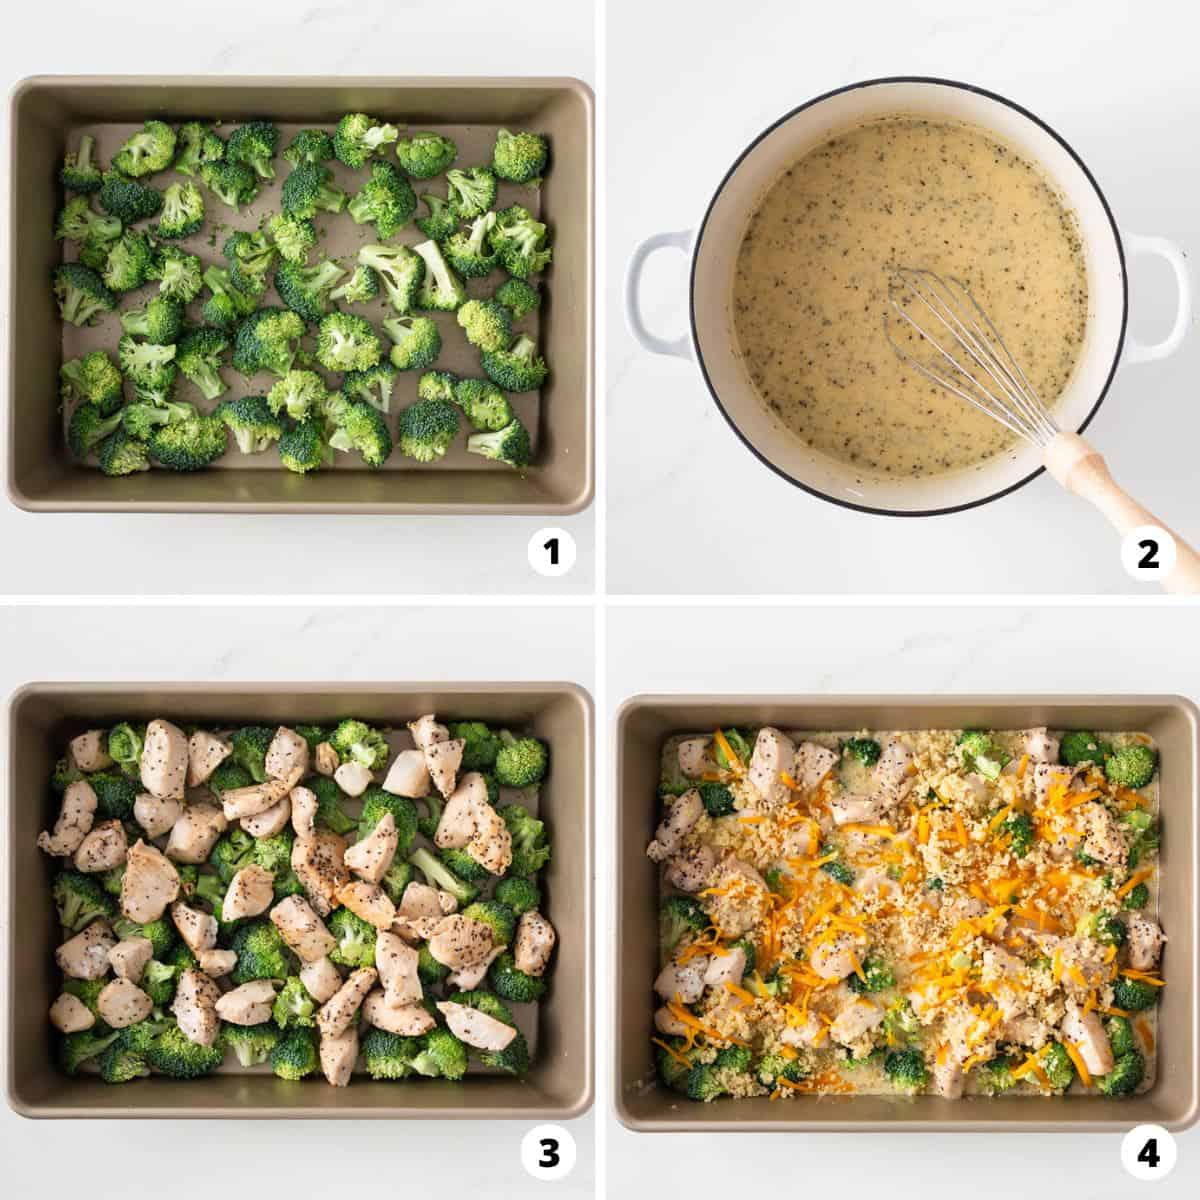 Showing how to make chicken divan in a 4 step collage.